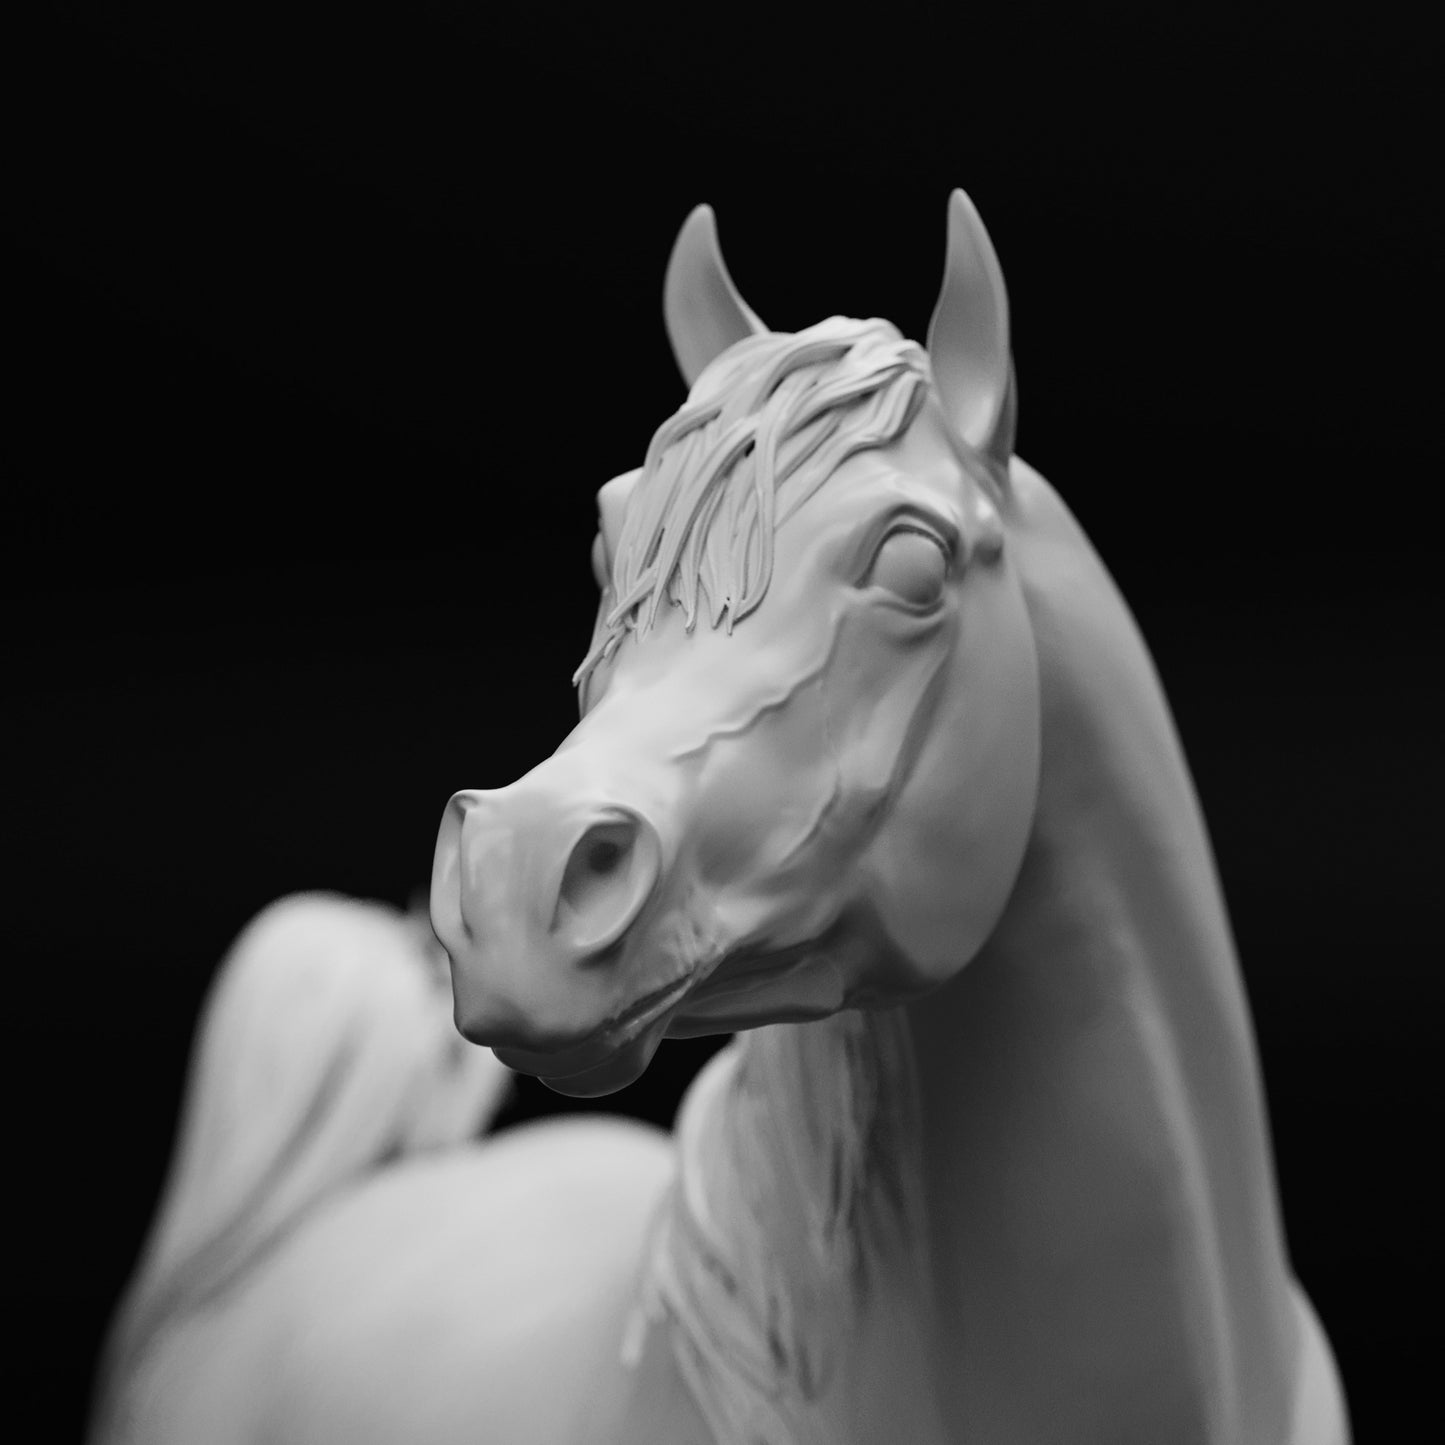 Conner relaxed Arabain Stallion HFH exclusive - White resin ready to prep / paint  LTD EDITION